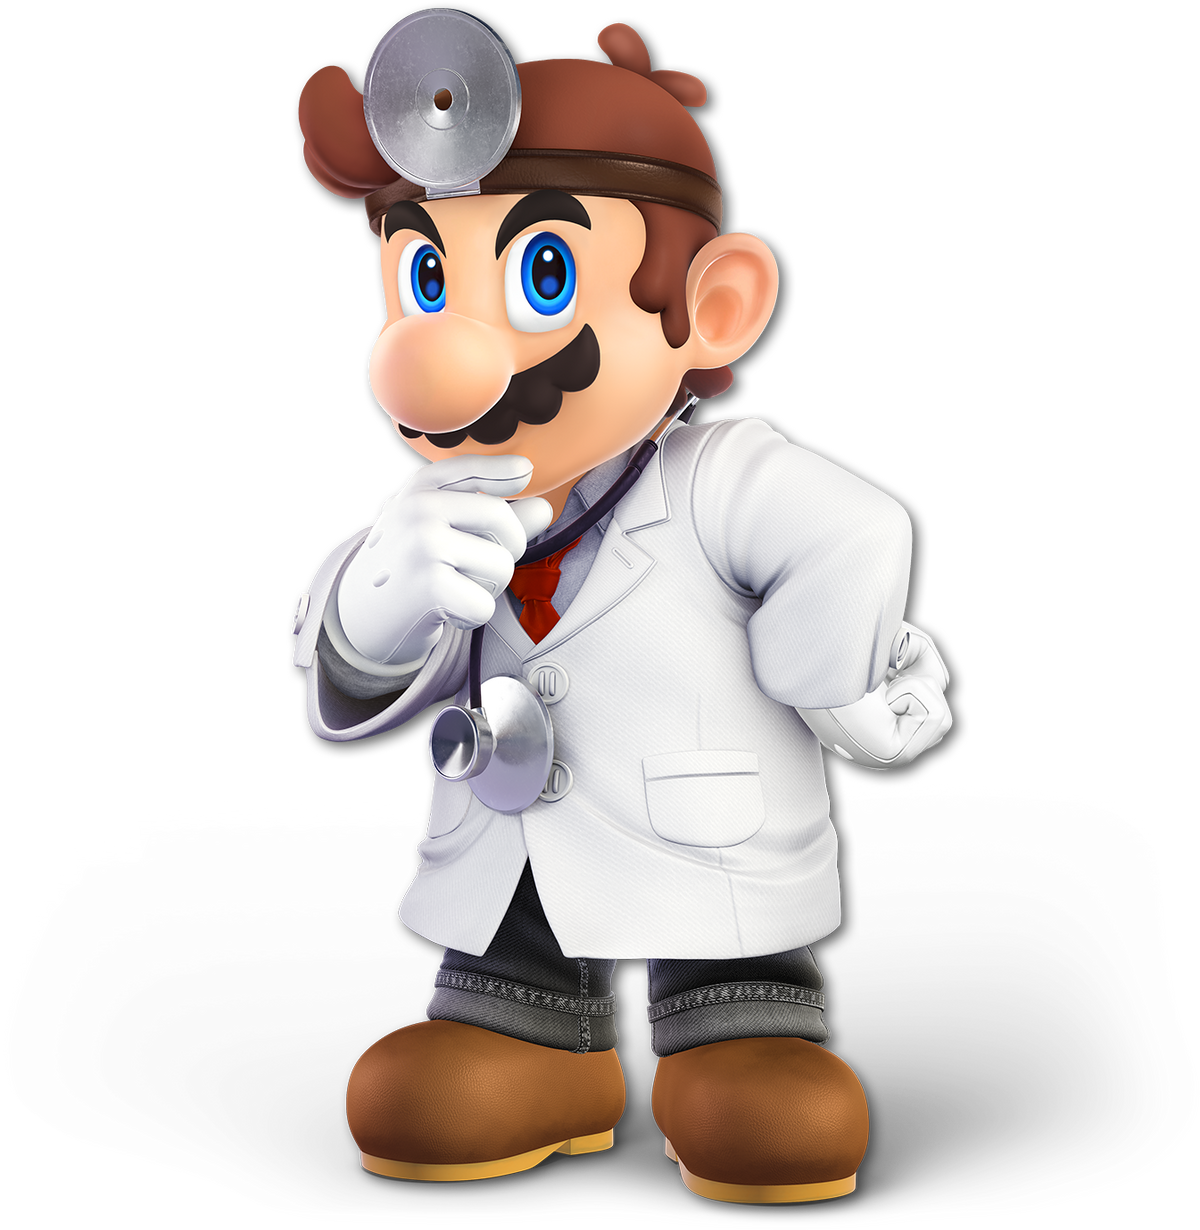 IGN on X: While Dr. Mario may be one of the most classic suits